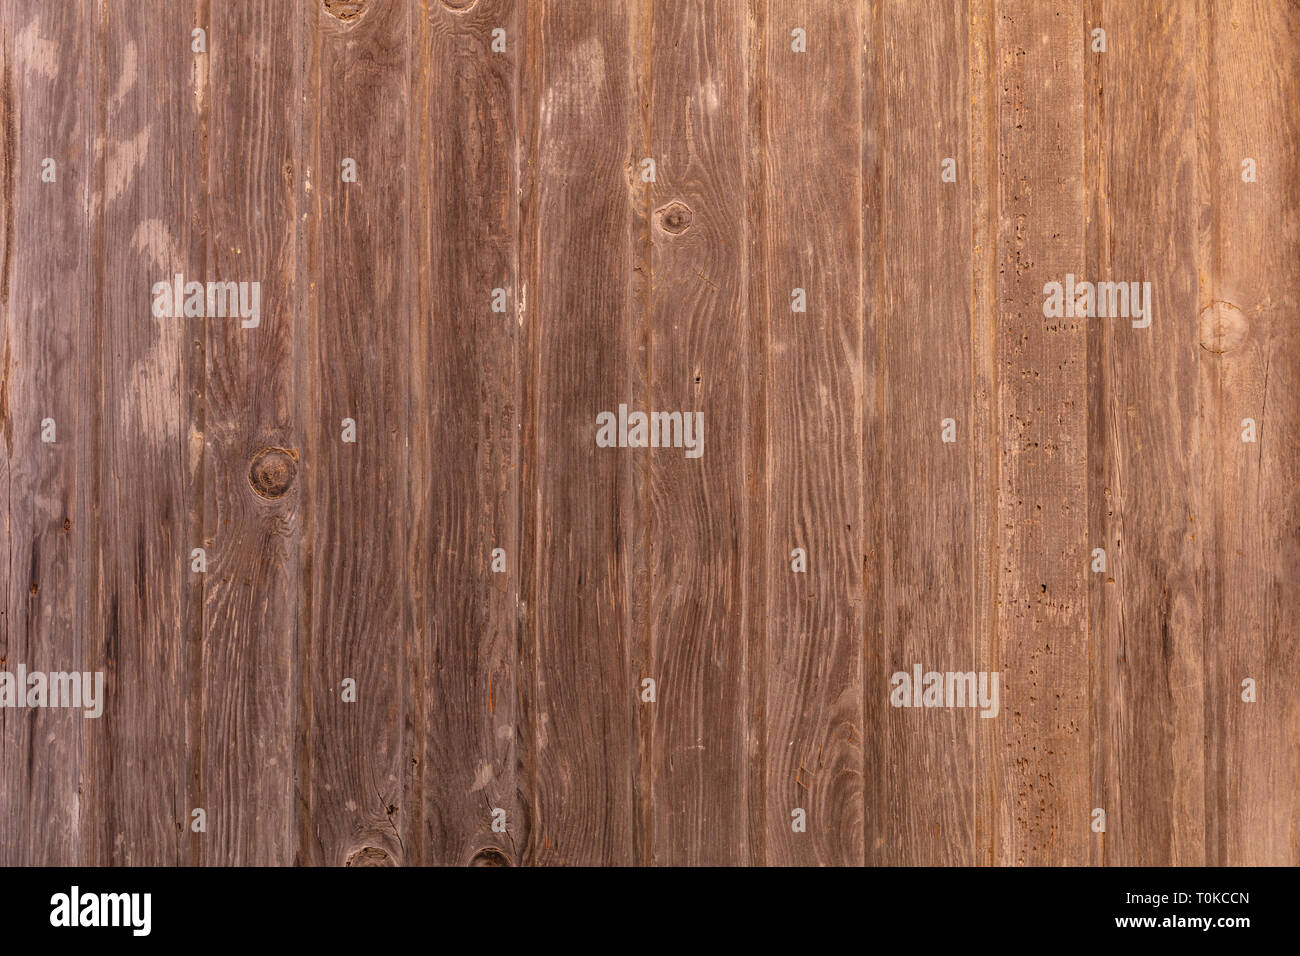 Vintage natural wood background, texture, Old wooden brown board Stock Photo